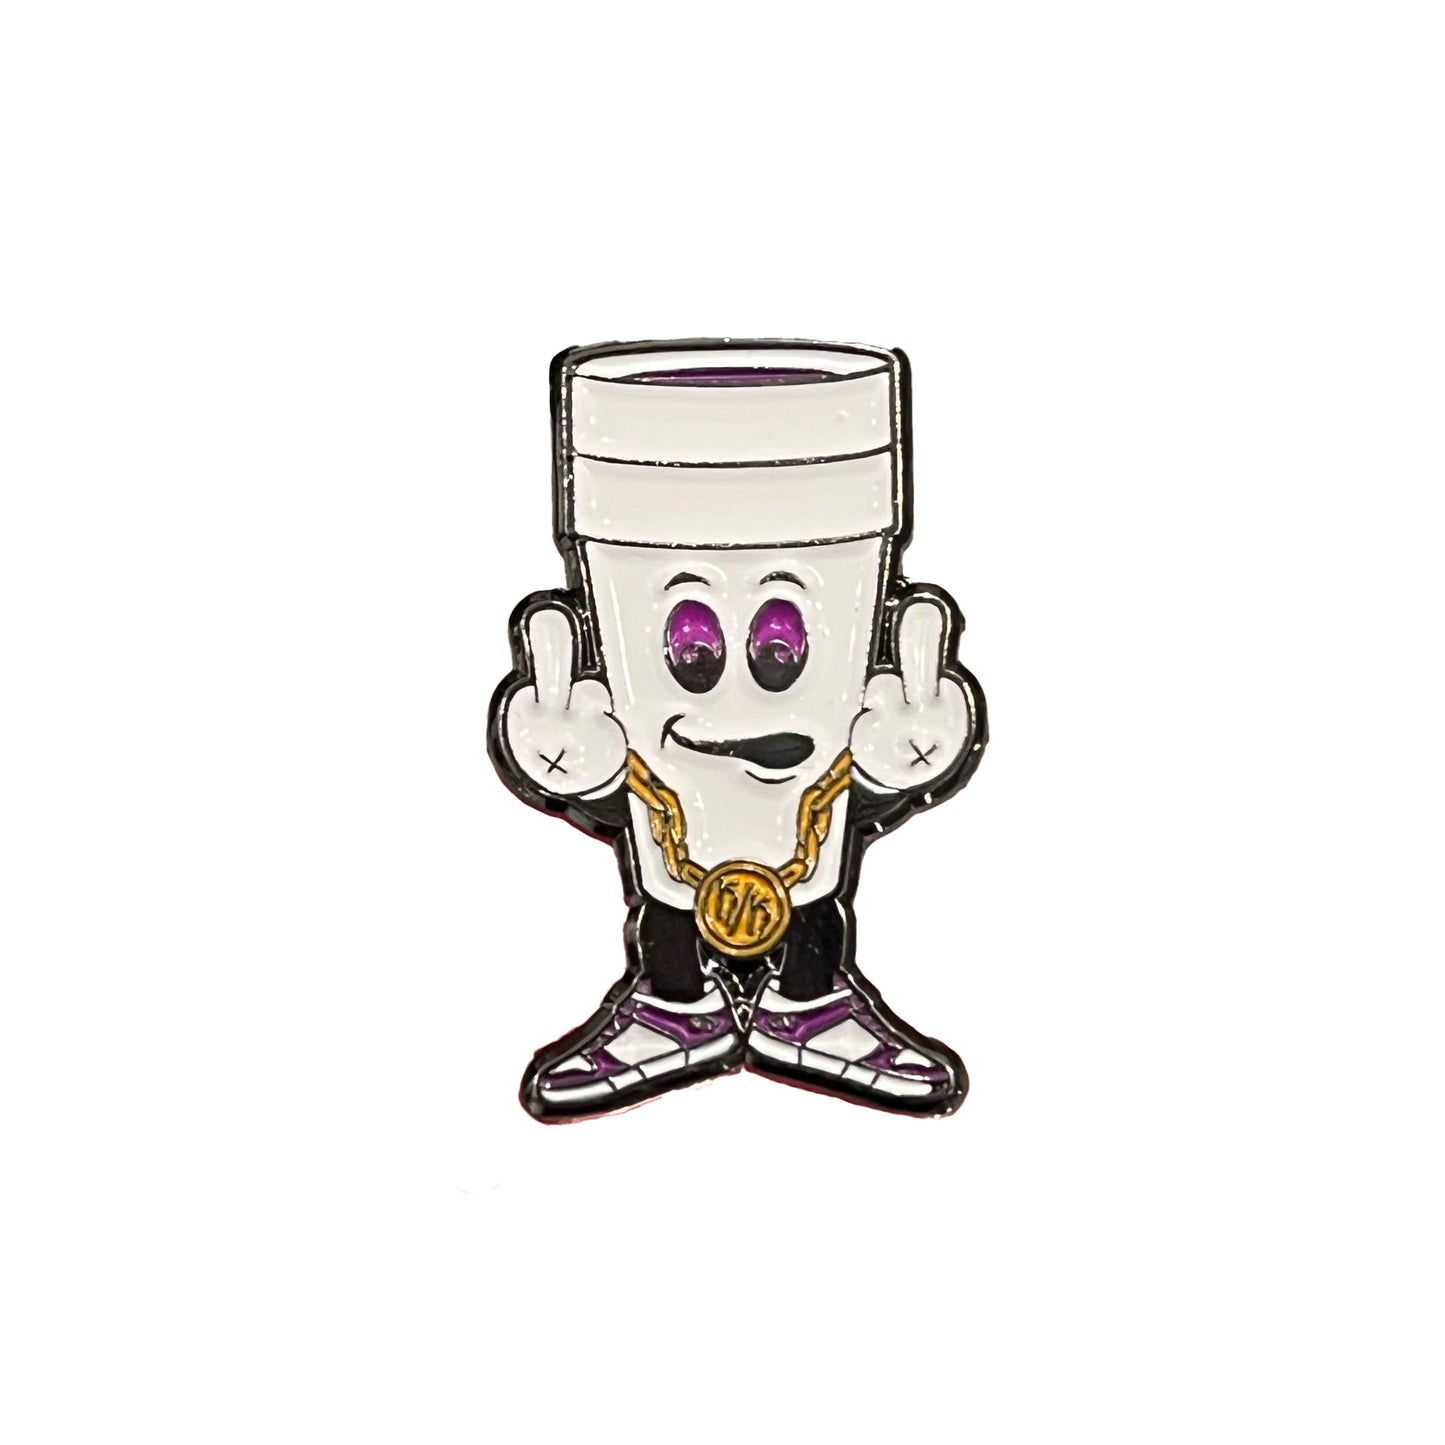 Cup character pin